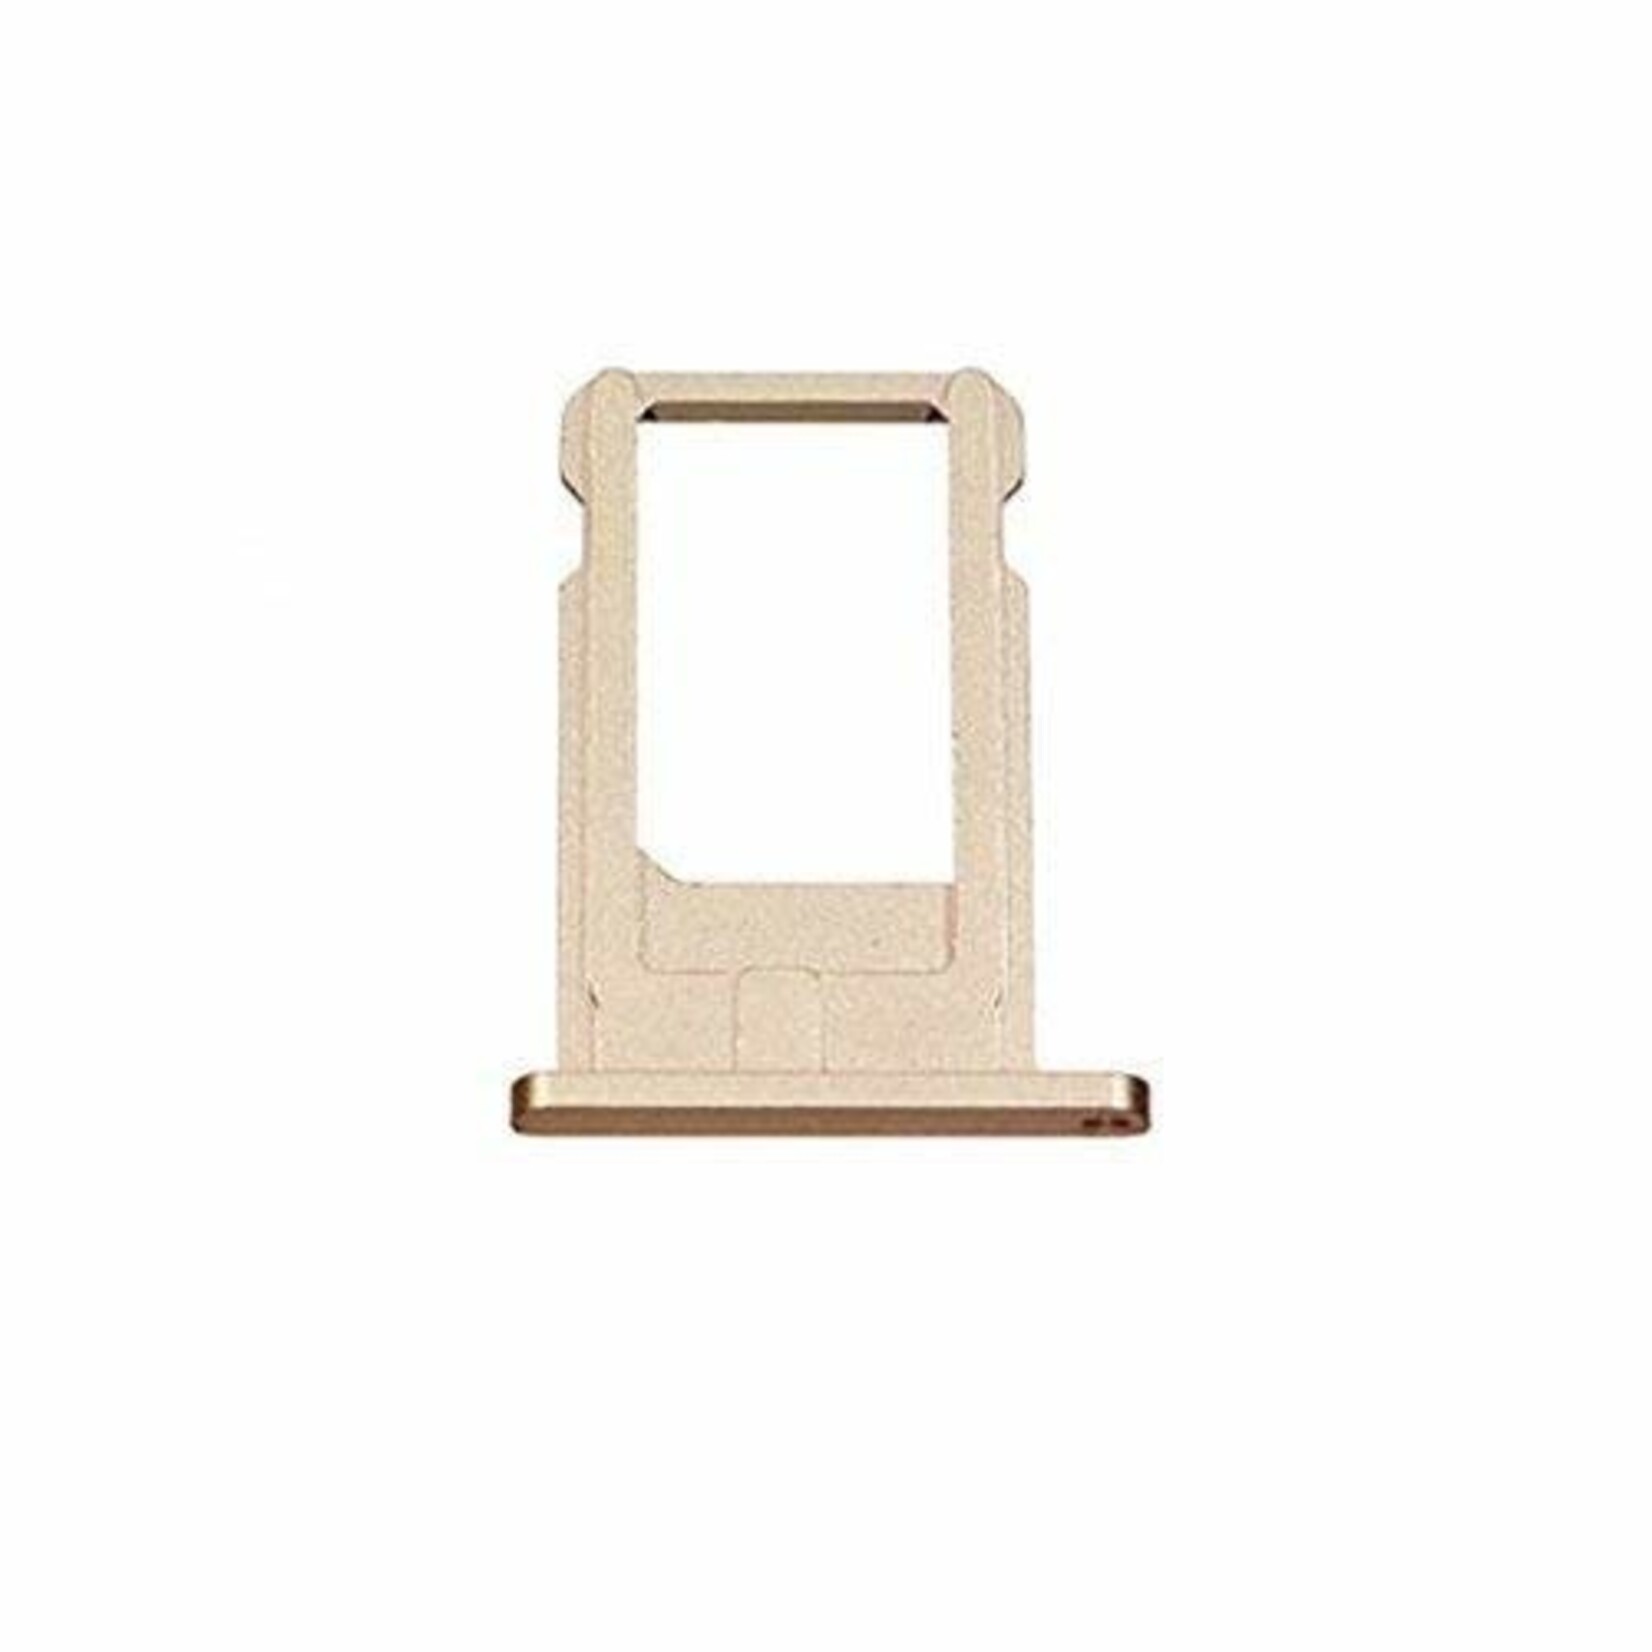 Apple SIM TRAY NOIR OR GOLD IPHONE 6S